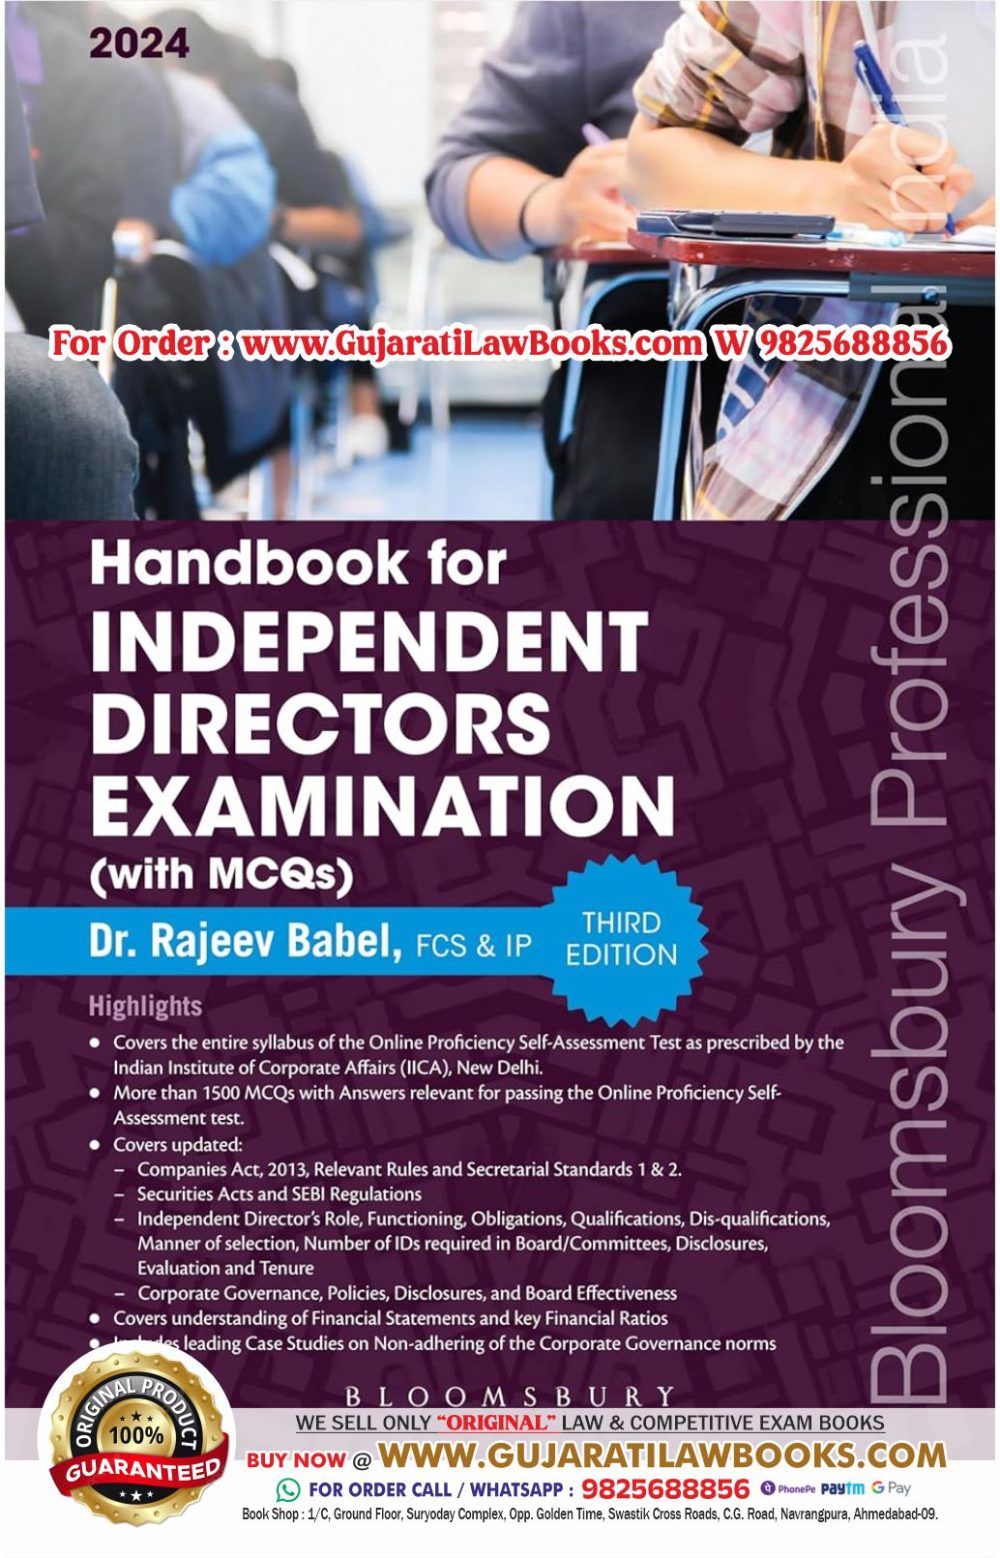 Handbook for INDEPENDENT DIRECTOS EXAMINATION (With MCQs) Latest 2024 Edition Bloomsbury